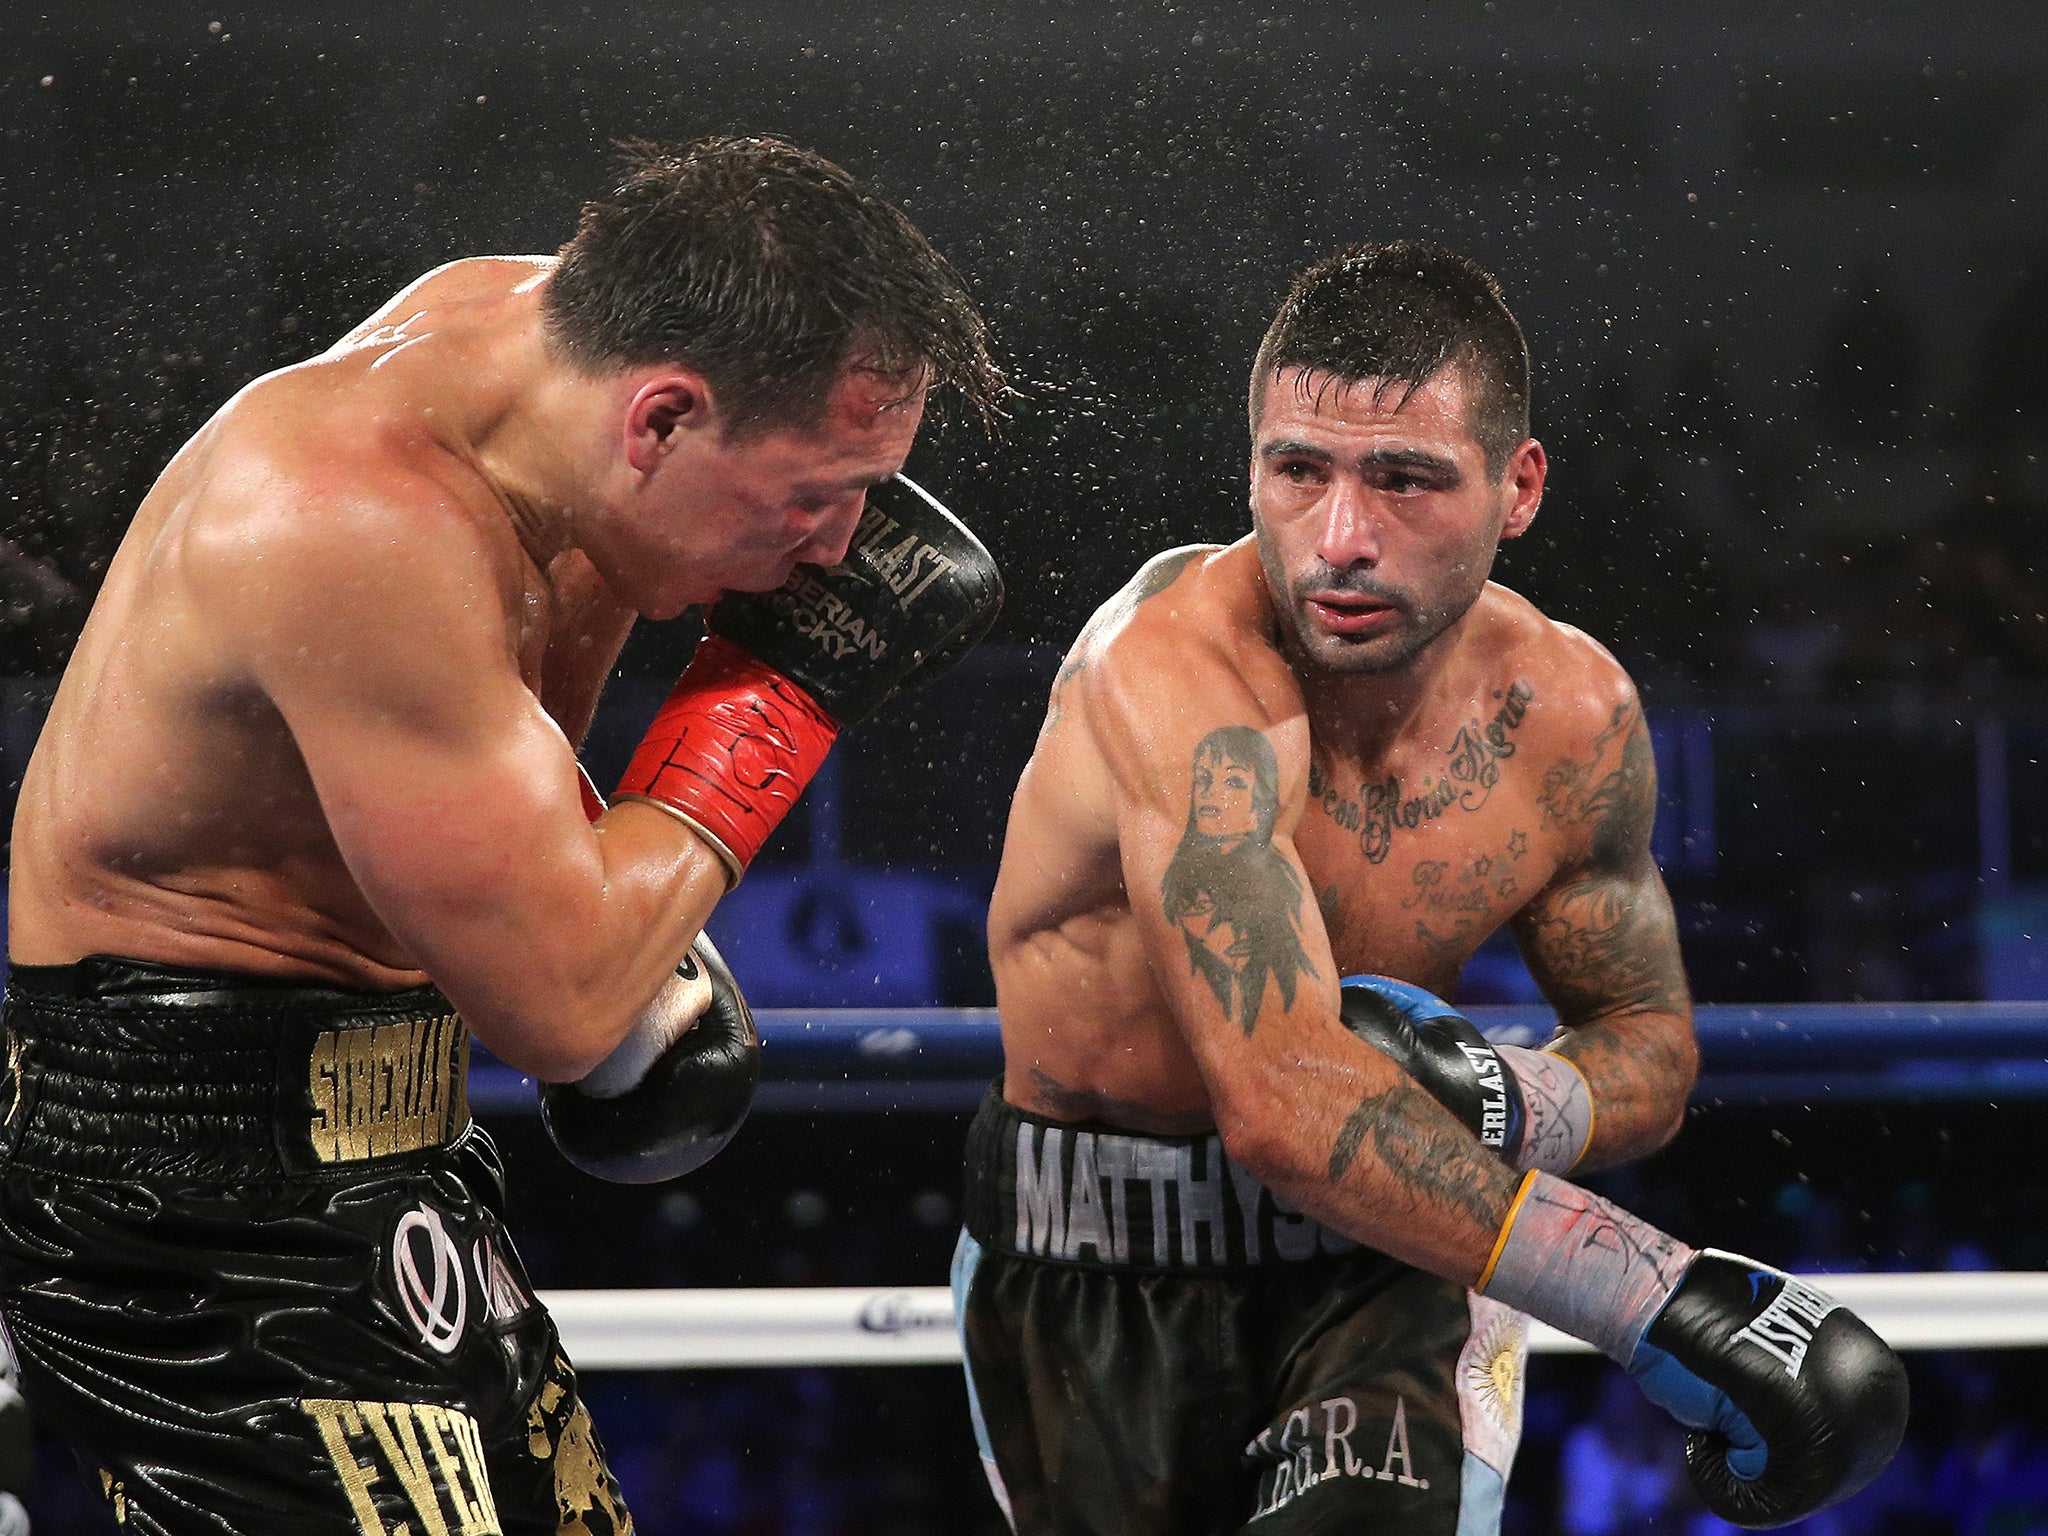 Lucas Matthysse defeated Ruslan Provodnikov in April